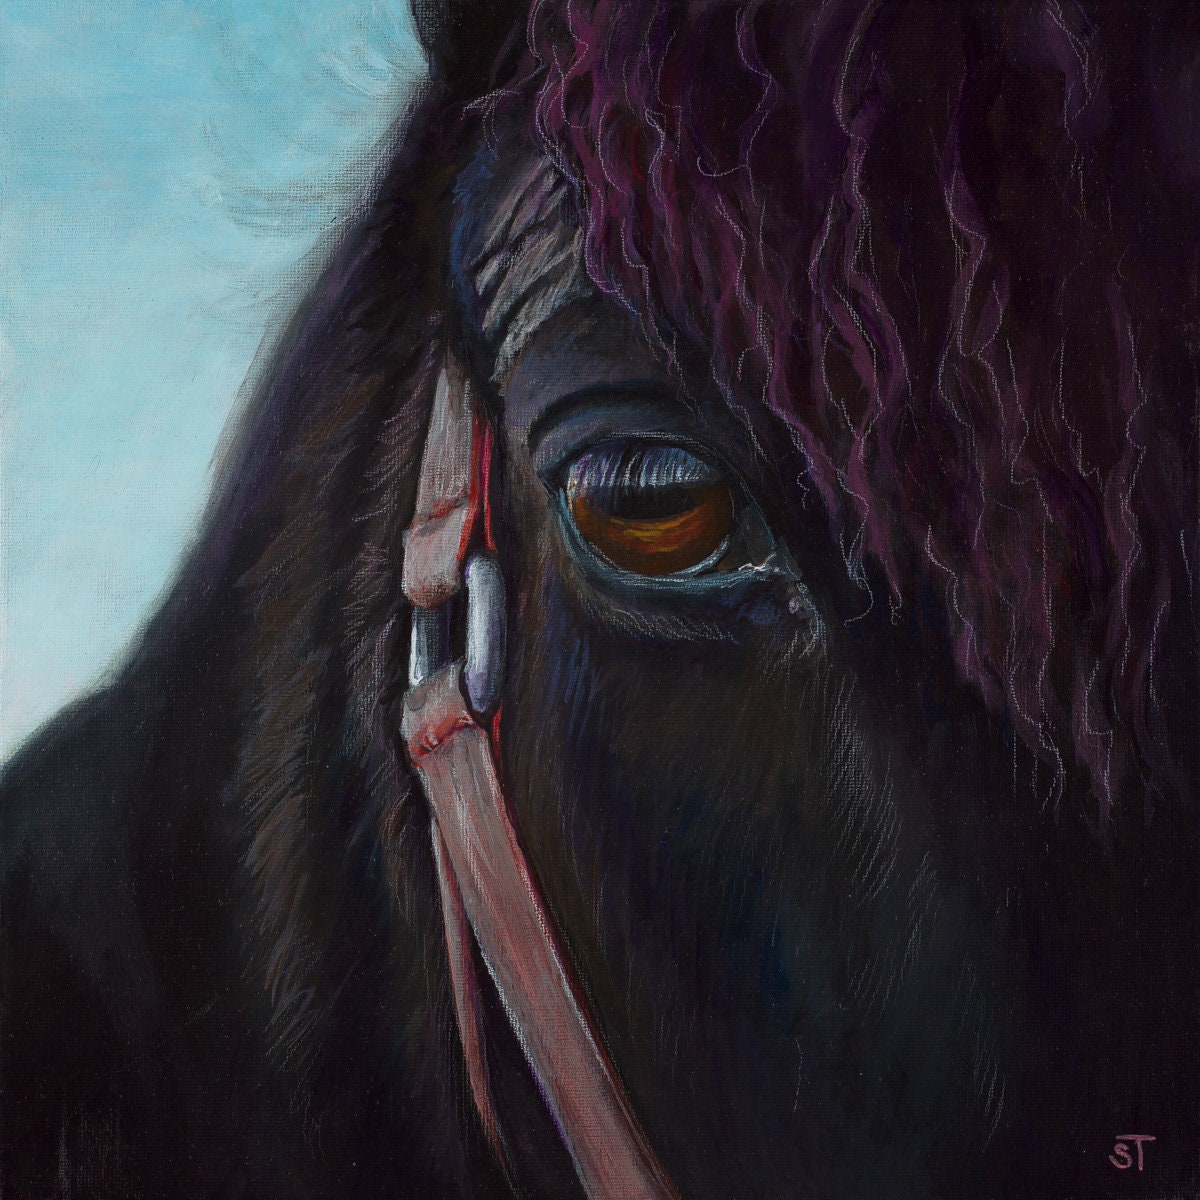 Horse Greeting Card - Non-Archival Fine Art Prints - Note Card